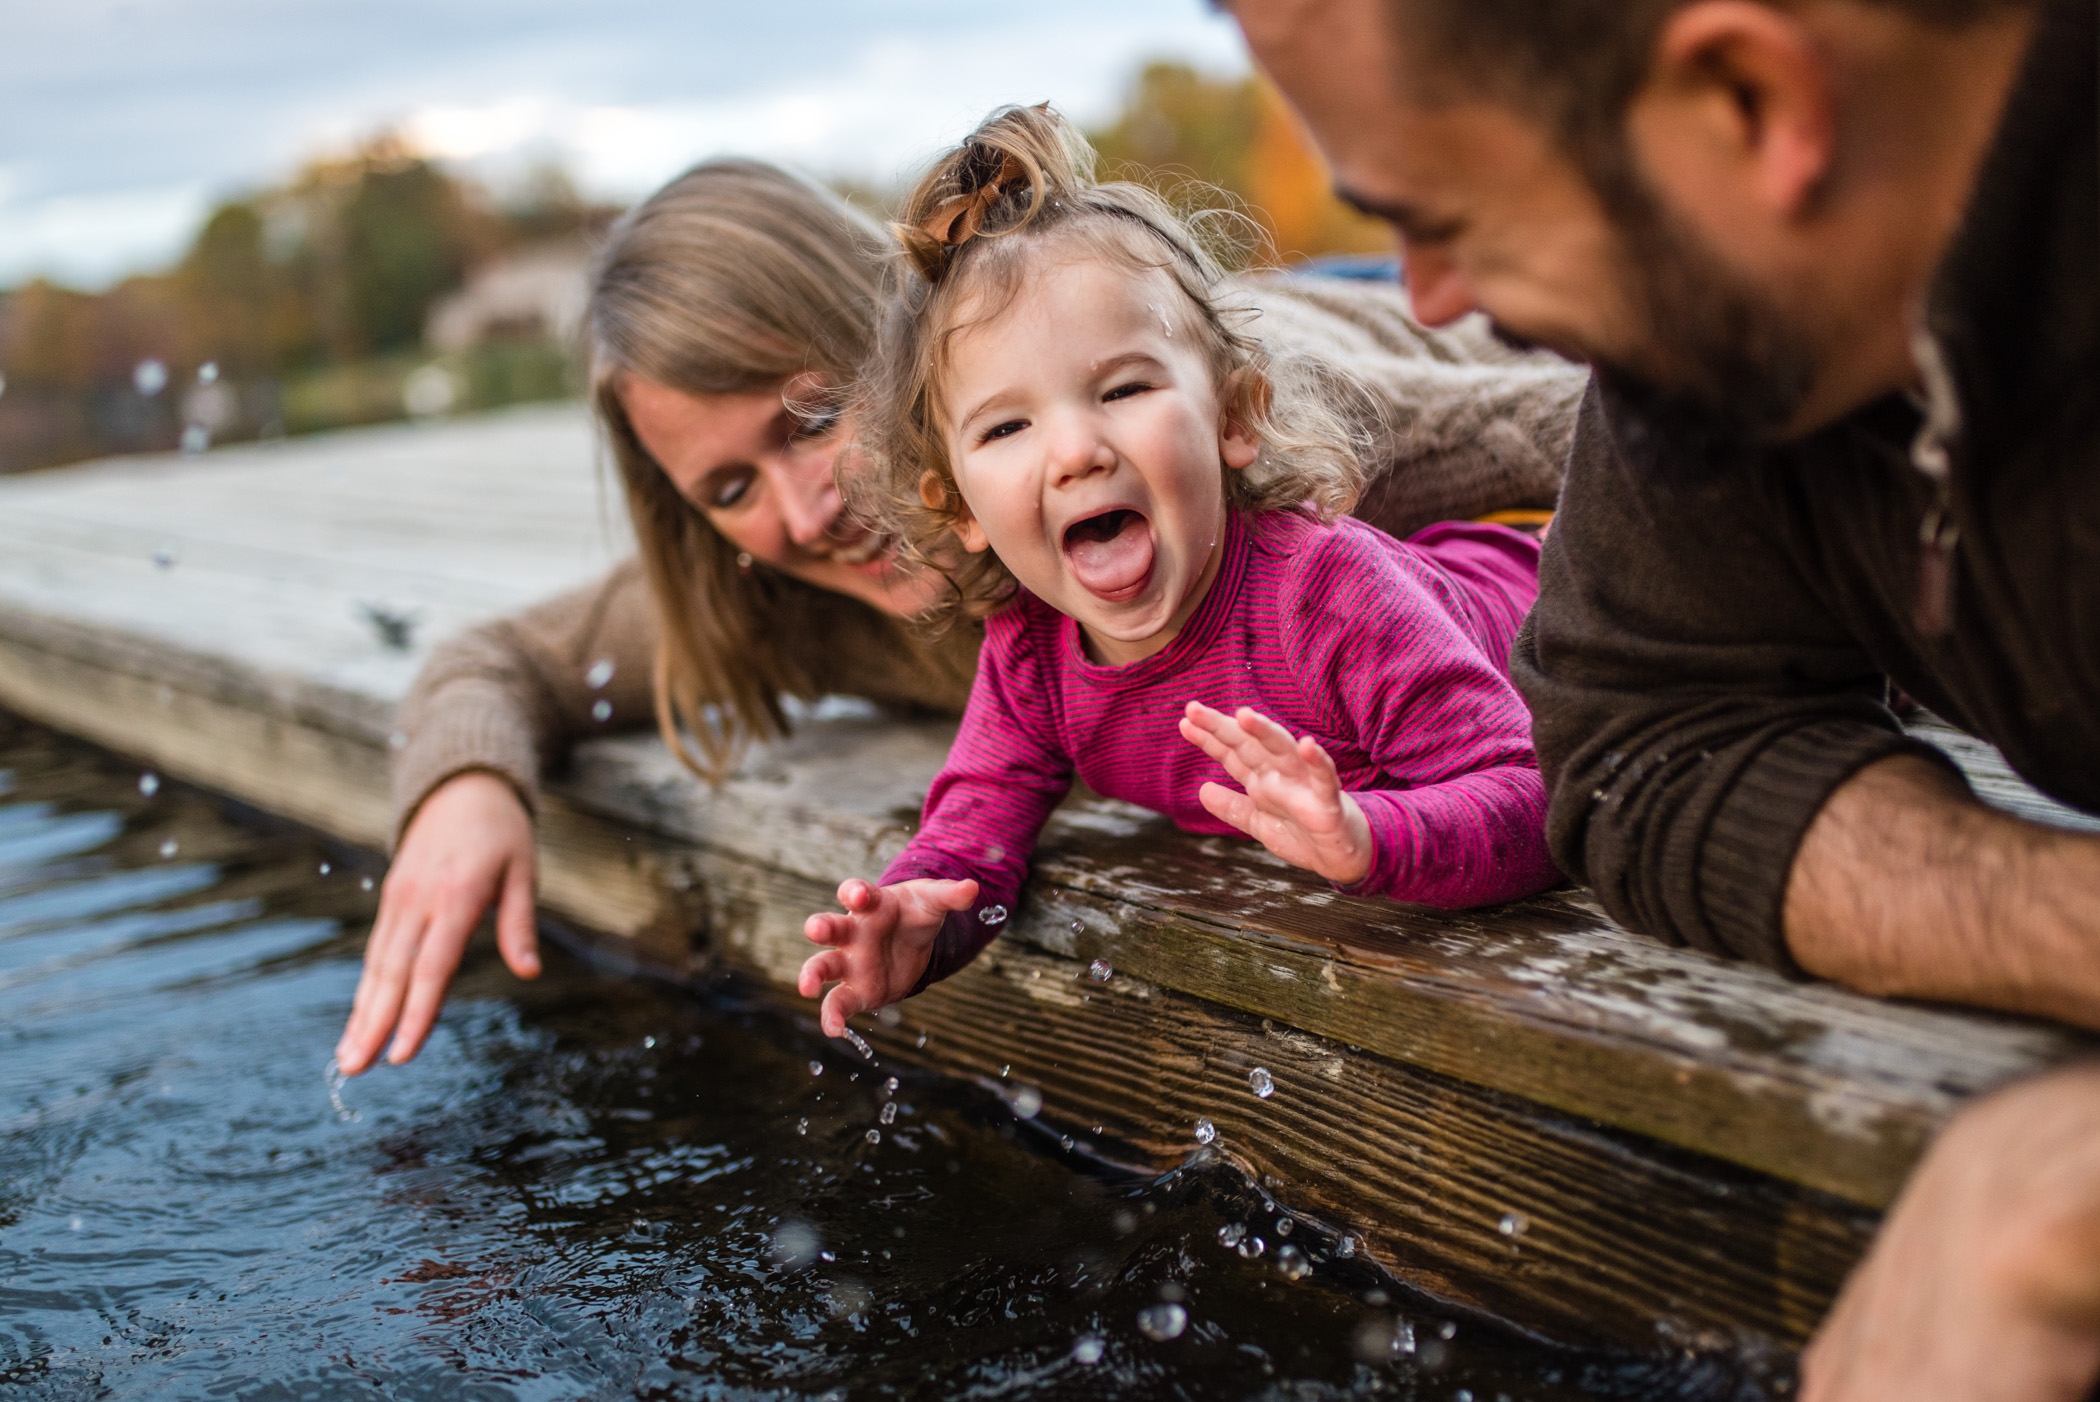 A toddler and her parents lay on a deck, splashing lake water and laughing.